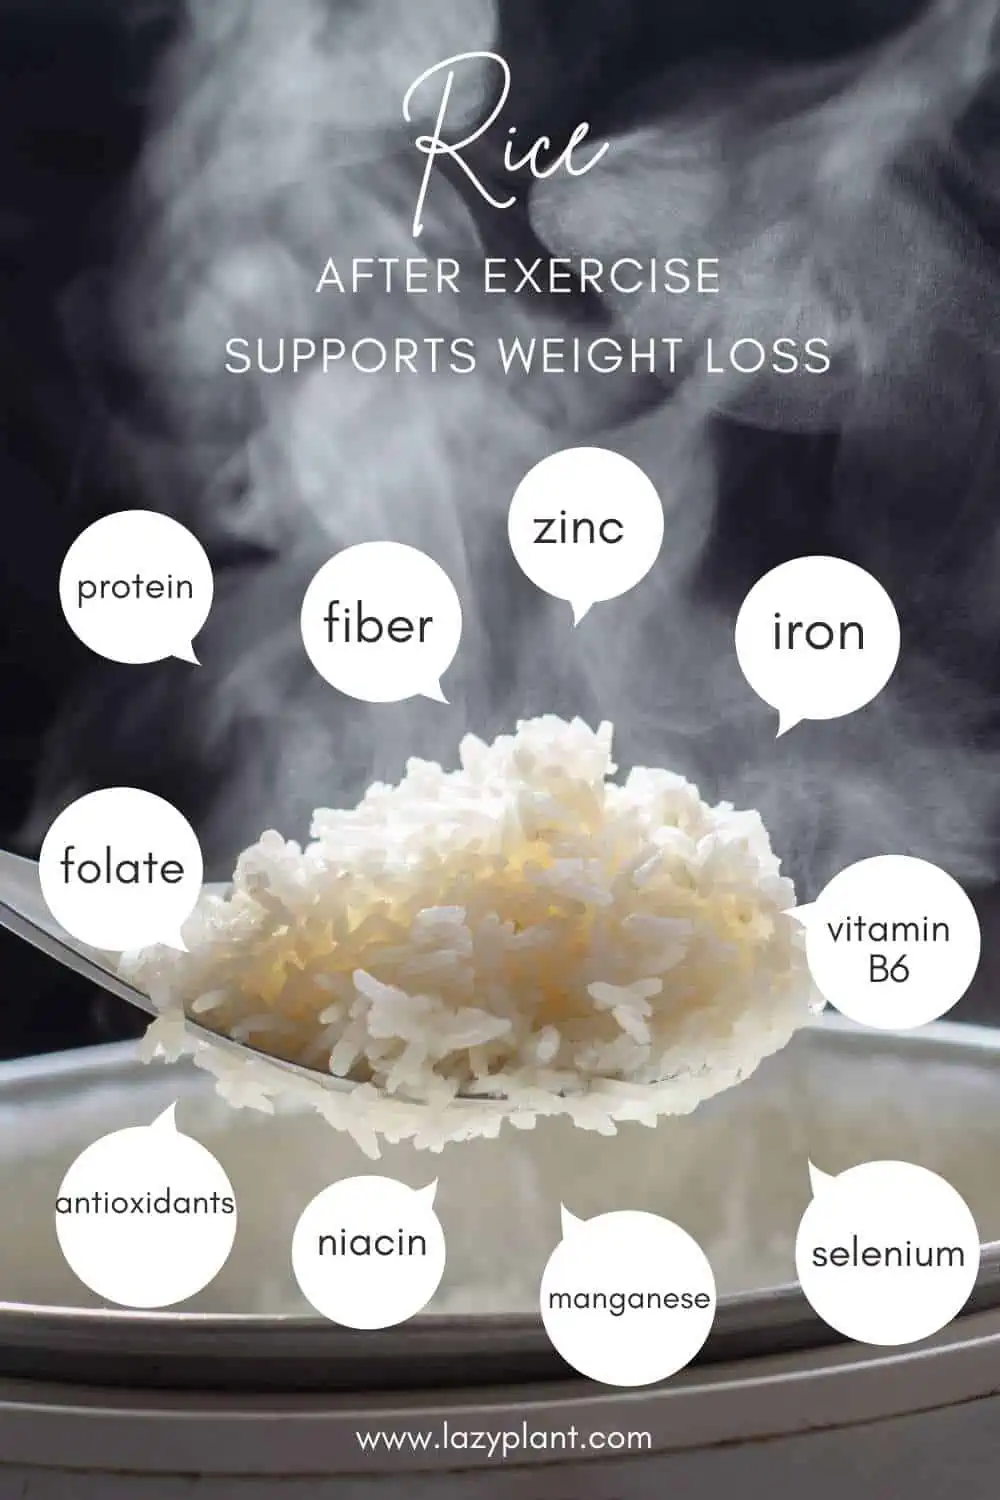 White or brown rice after exercise for weight loss?